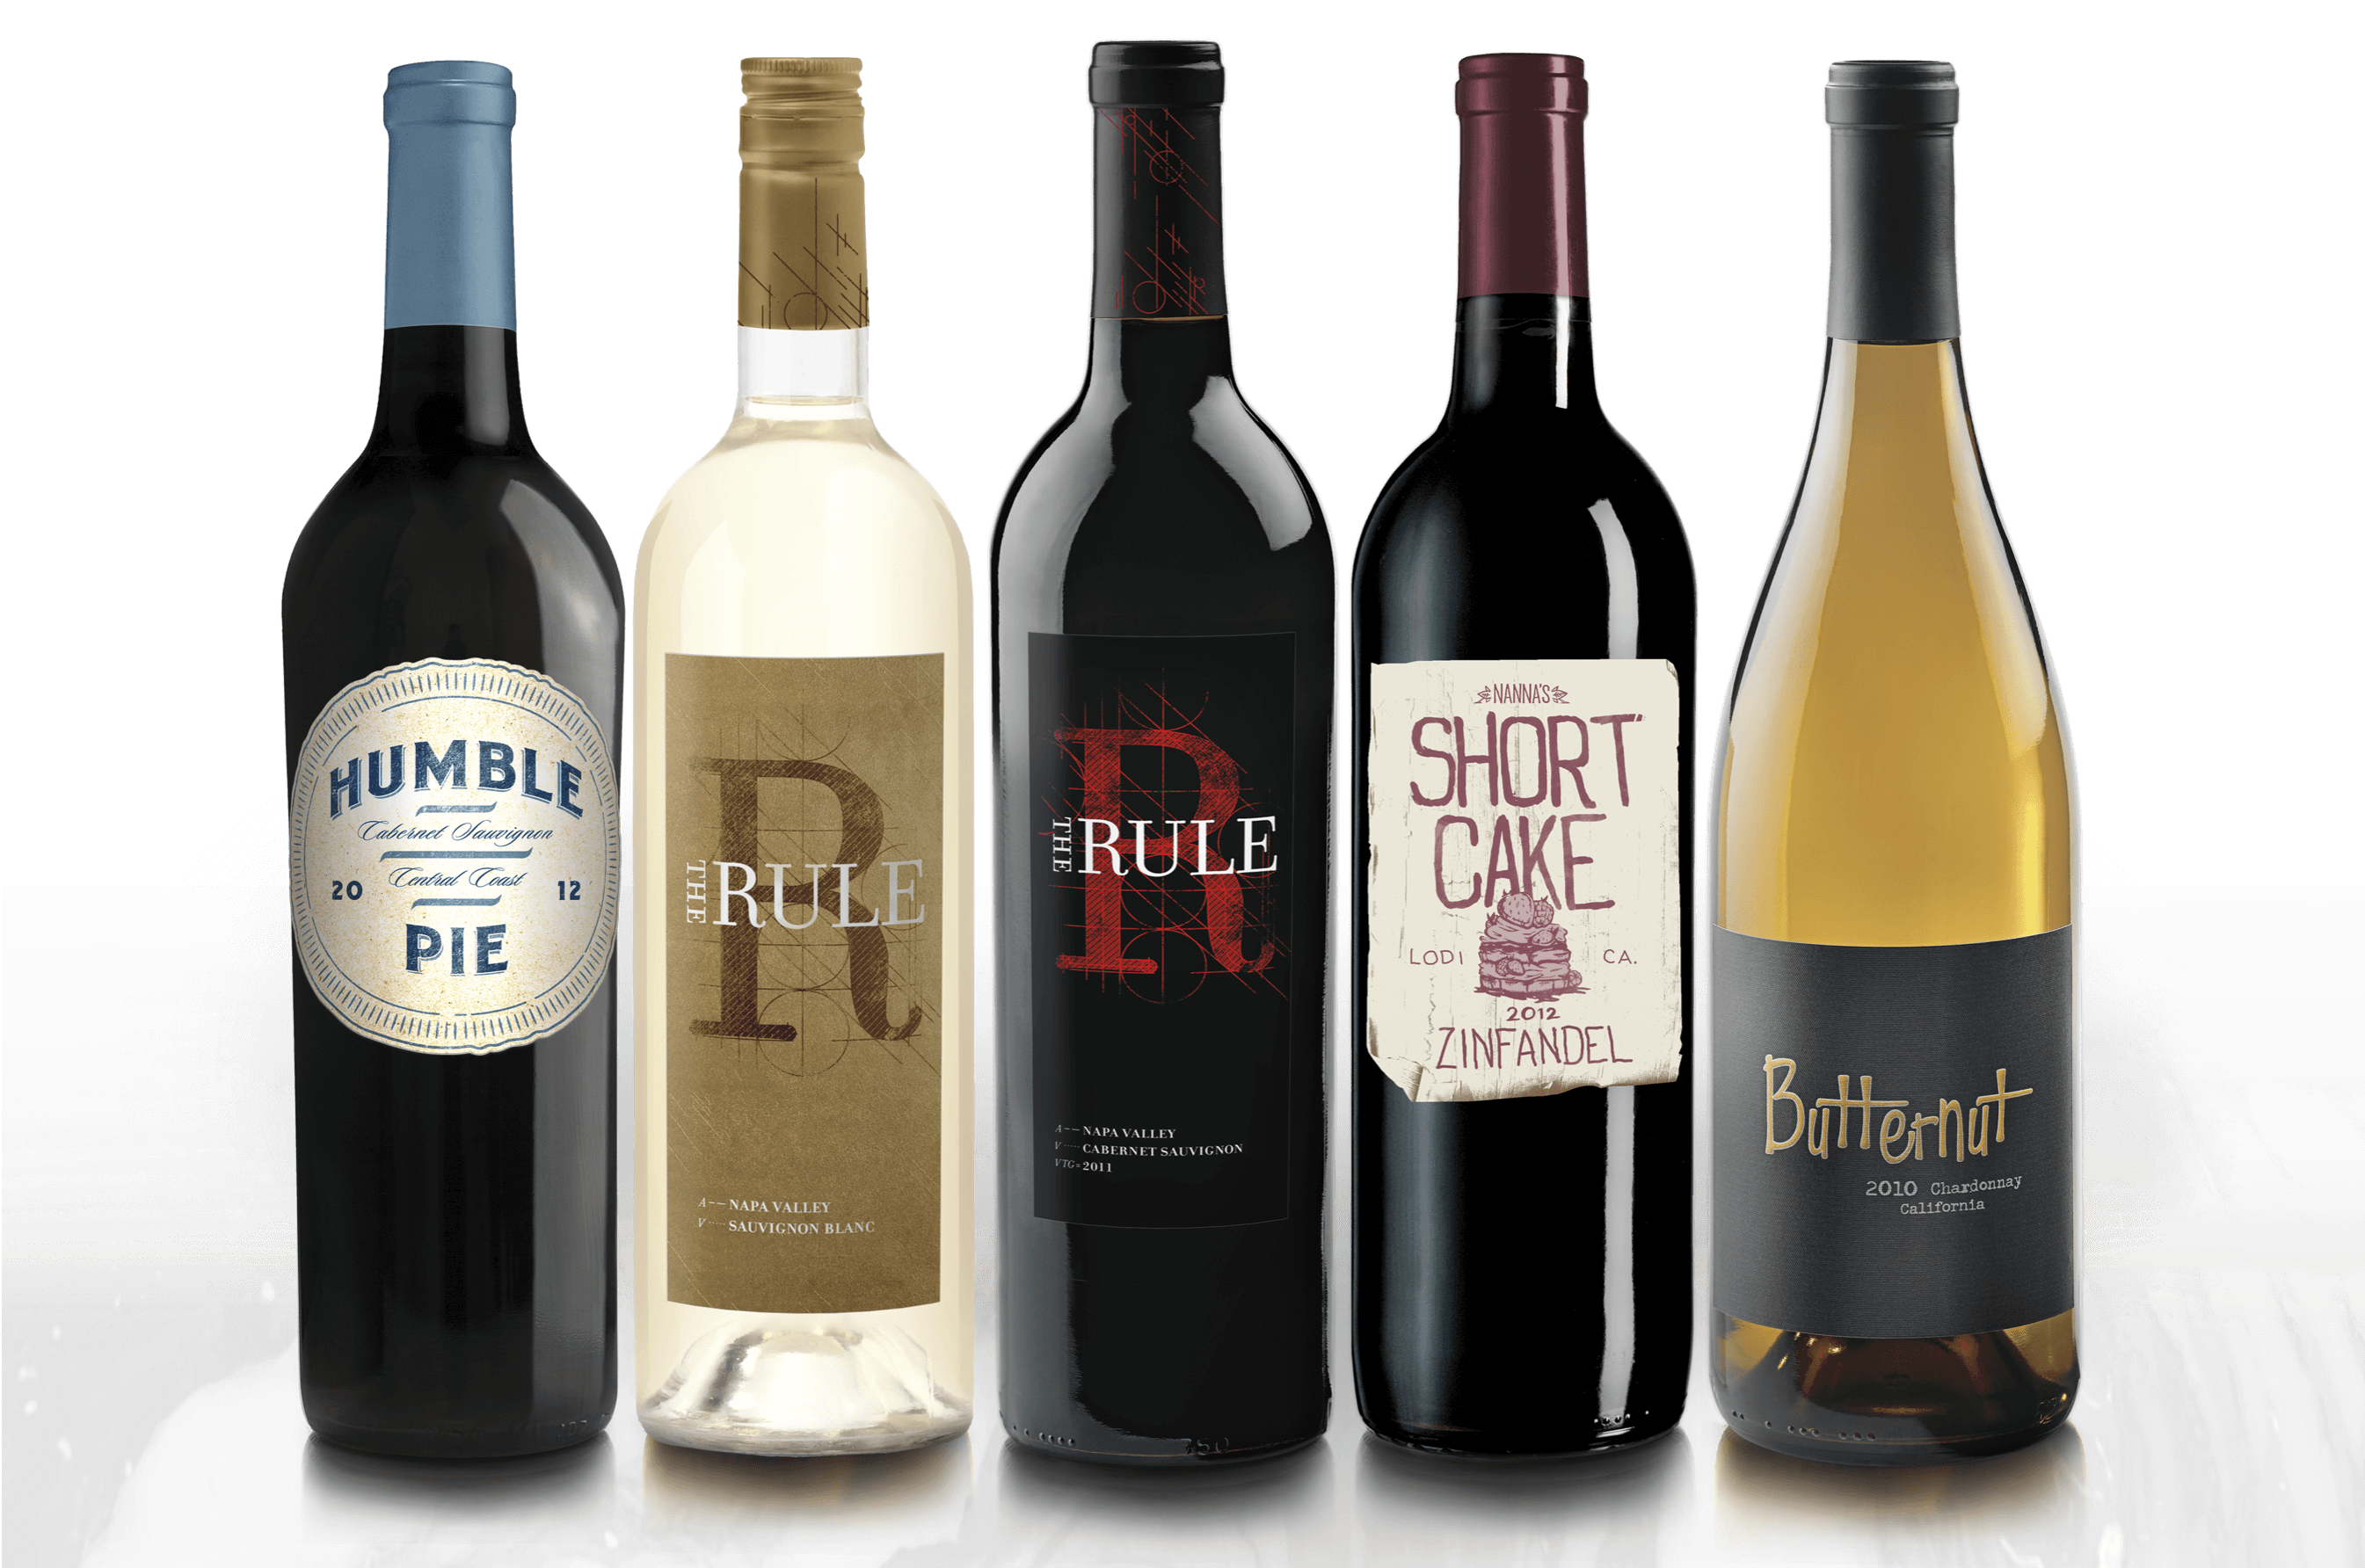 Wine Bottle images of Humble Pie, The Rule savignon blanc and cab sauv, Short Cake Zinfandel, Butternut Chardonnay wines for BNA Wine Group, Napa, California